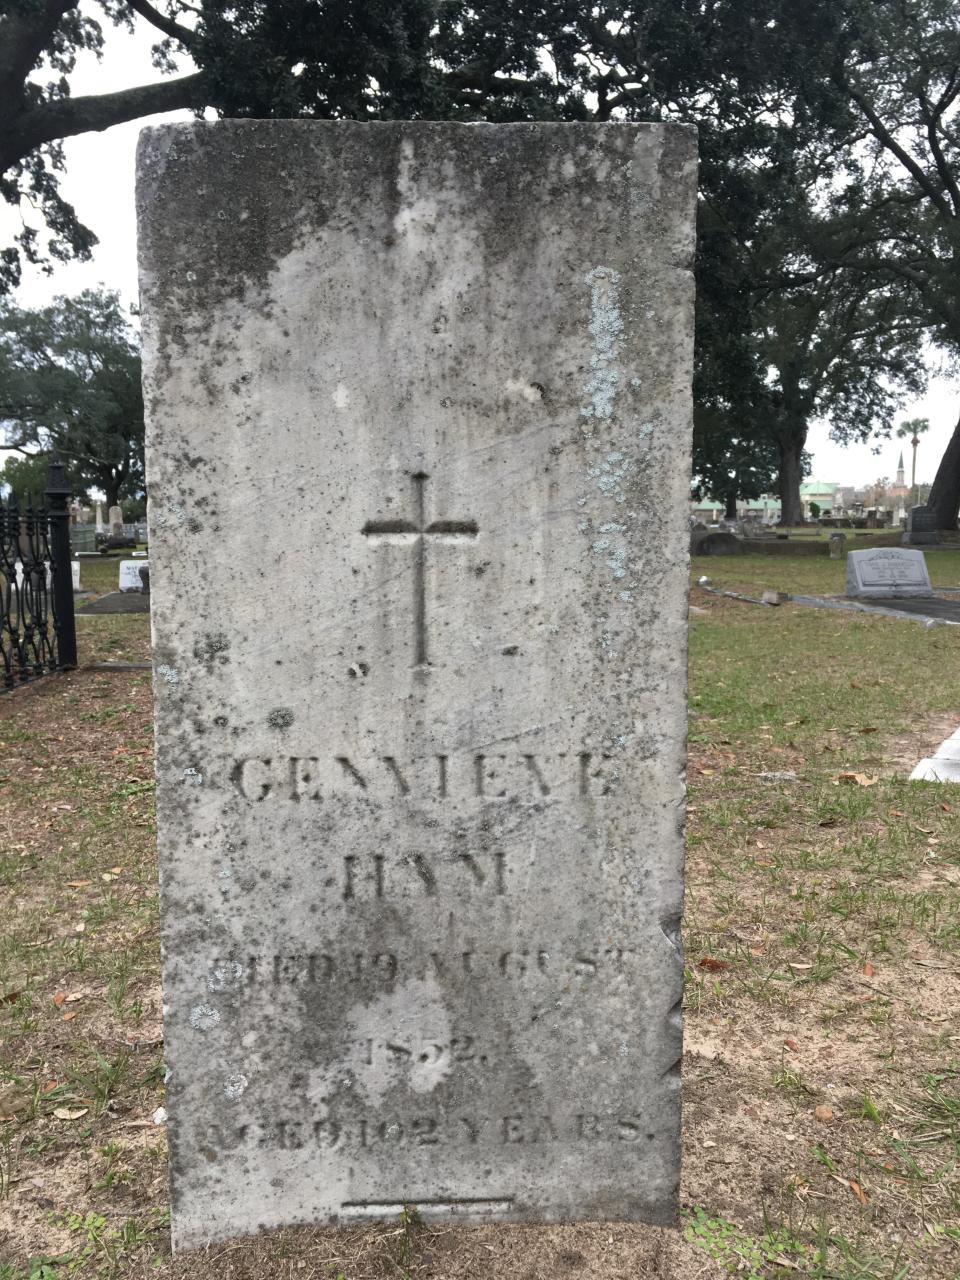 Genevieve Ham, longtime inhabitant of Pensacola, died on Aug. 19, 1852. She was born in Mobile, Alabama, between 1750 and 1770. Census records indicate her age was 82 at the time of her death. Her tombstone, however, notes she was 102 years old when she passed away.